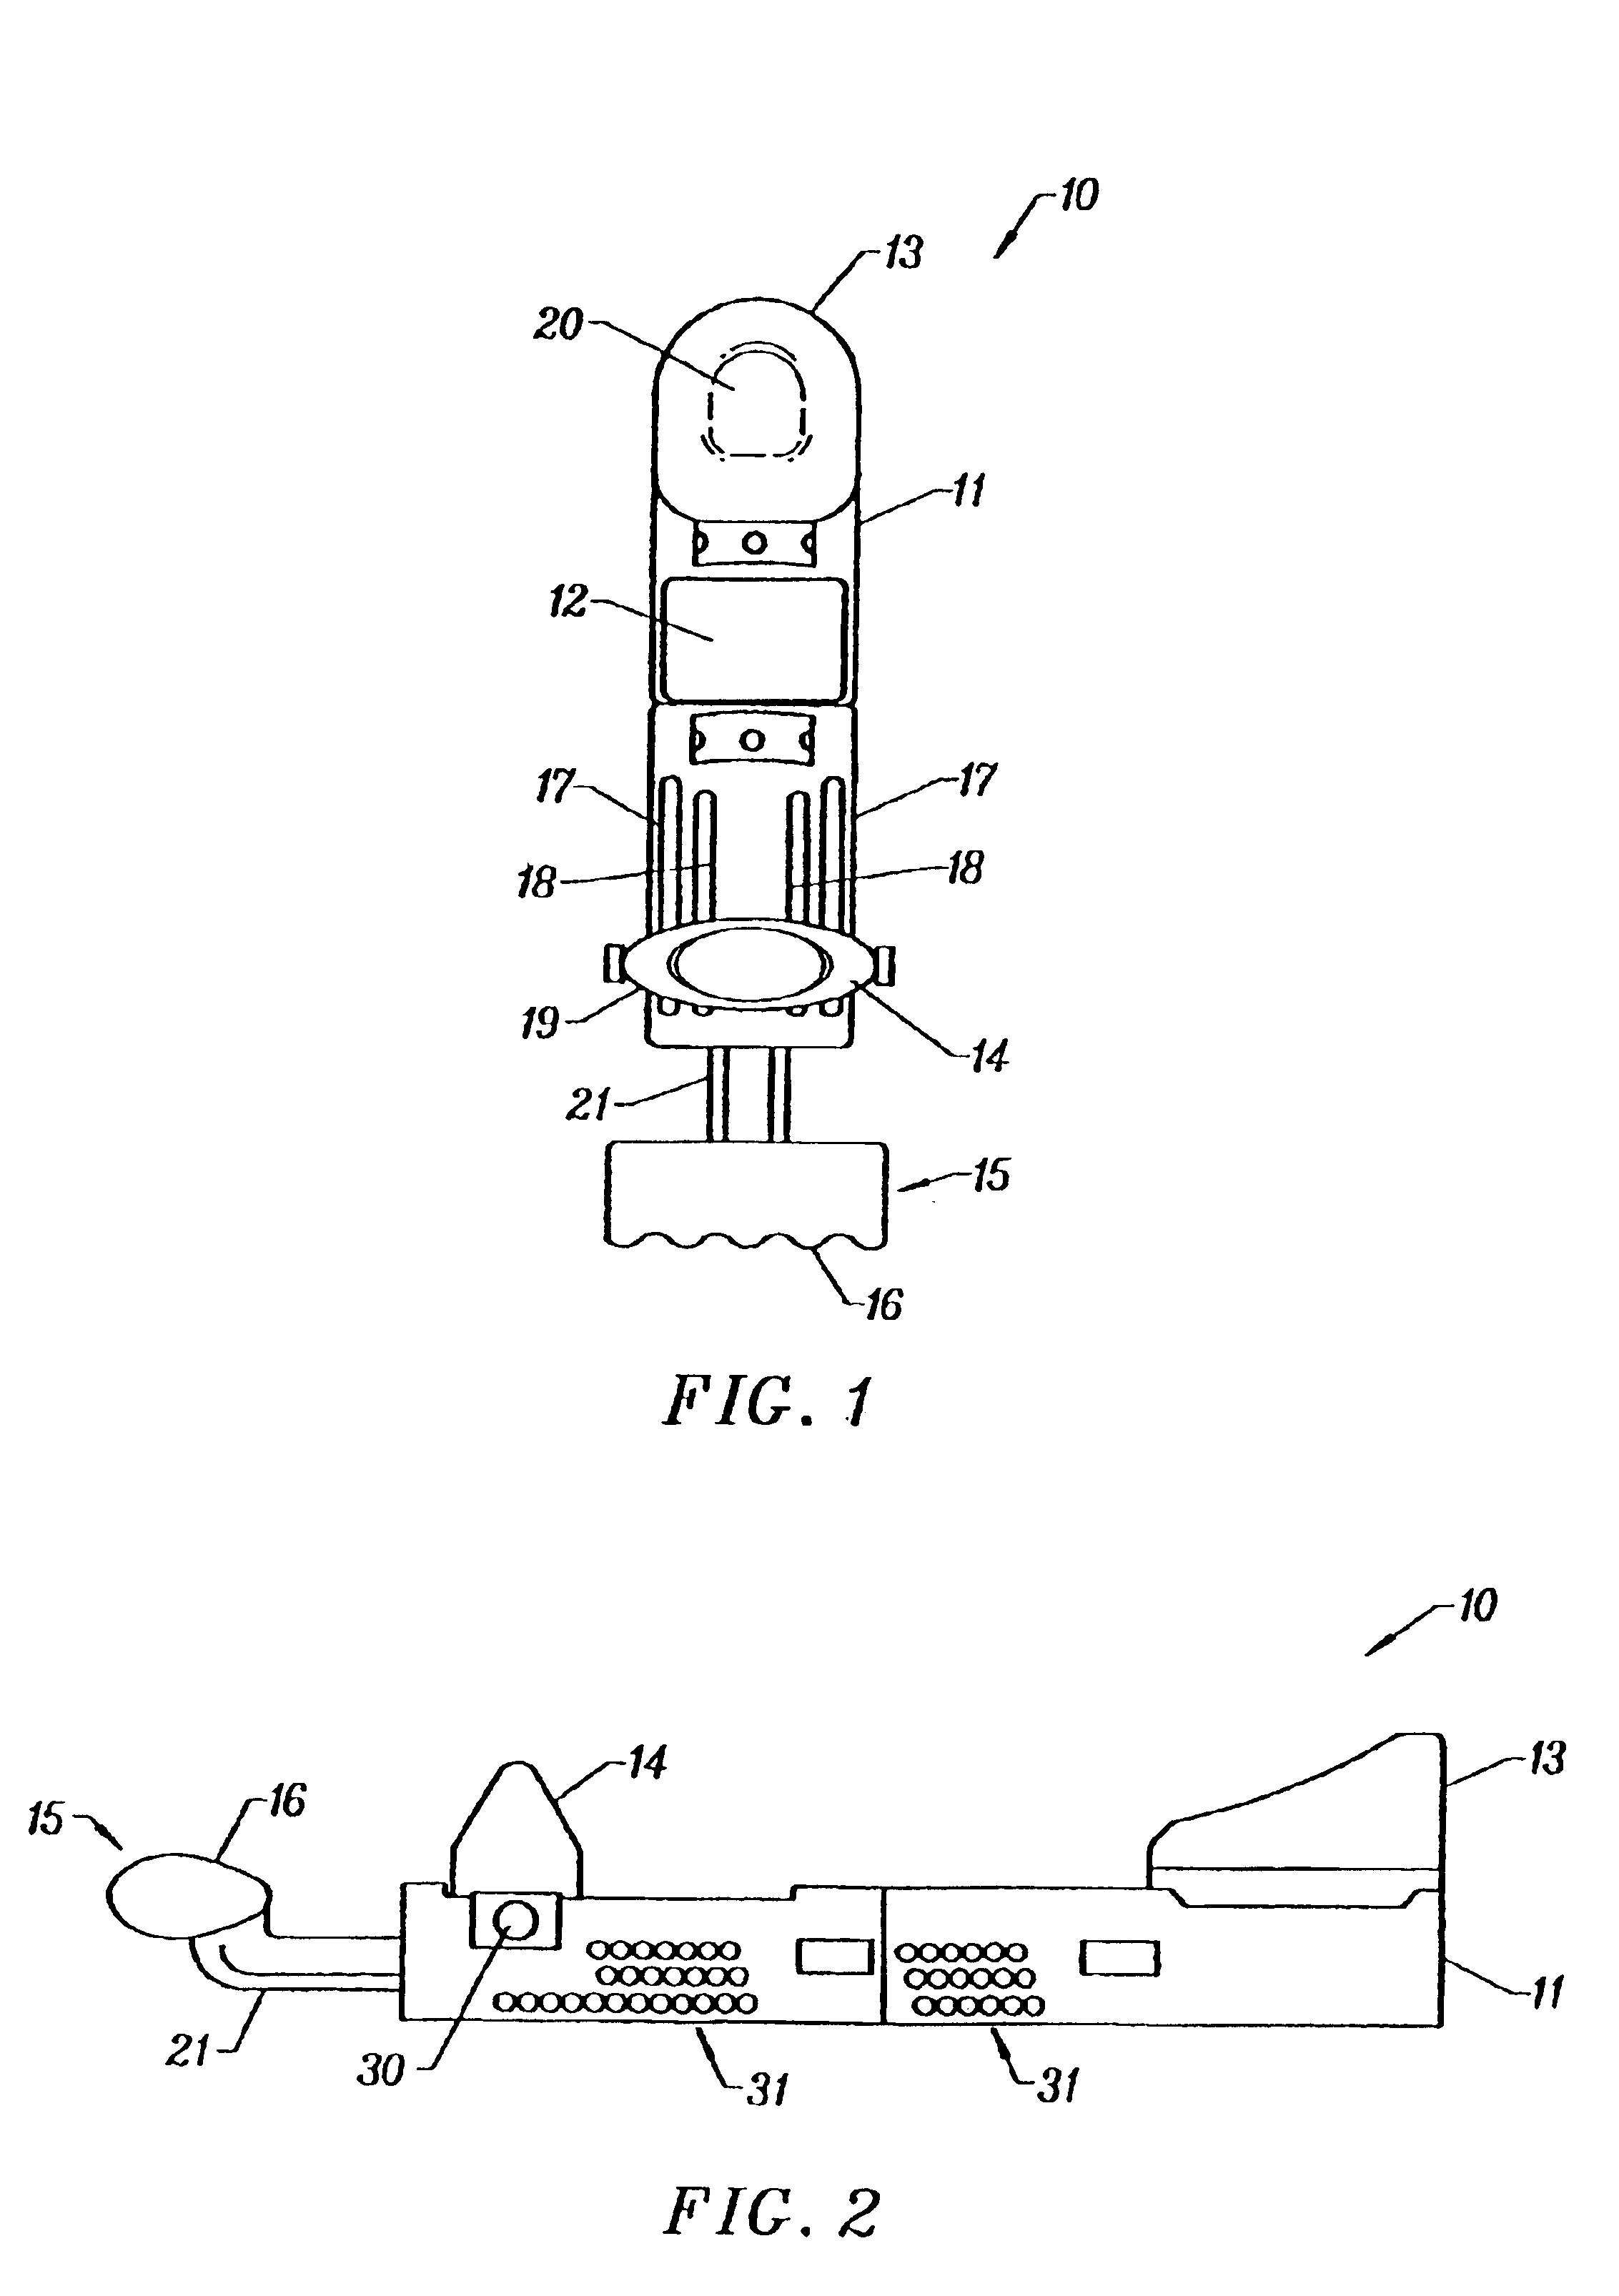 Method and apparatus for minimizing spectral interference due to within and between sample variations during in-situ spectral sampling of tissue